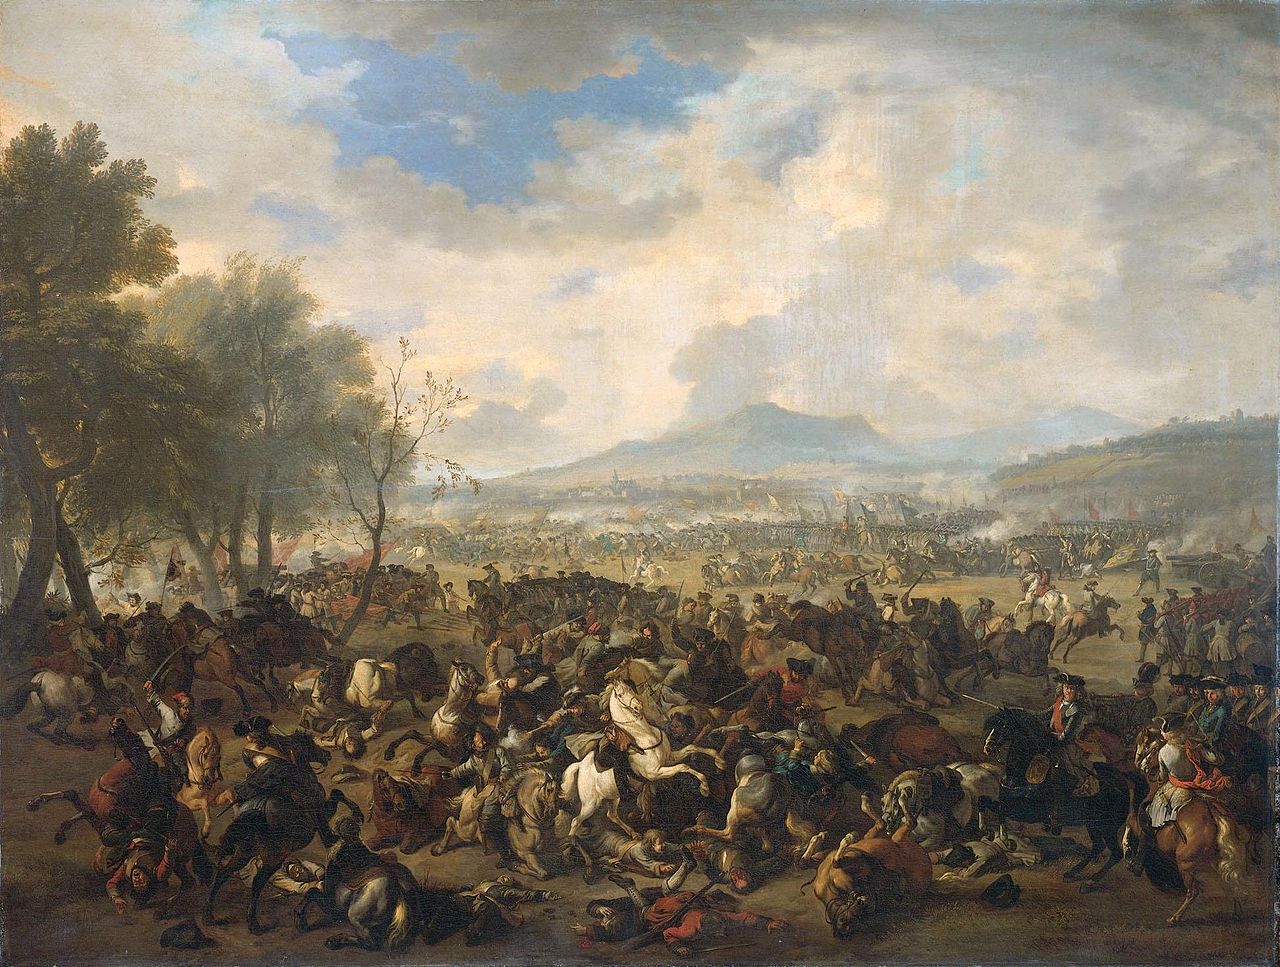 The Battle of Ramillies between the French and the English, 23 May 1706